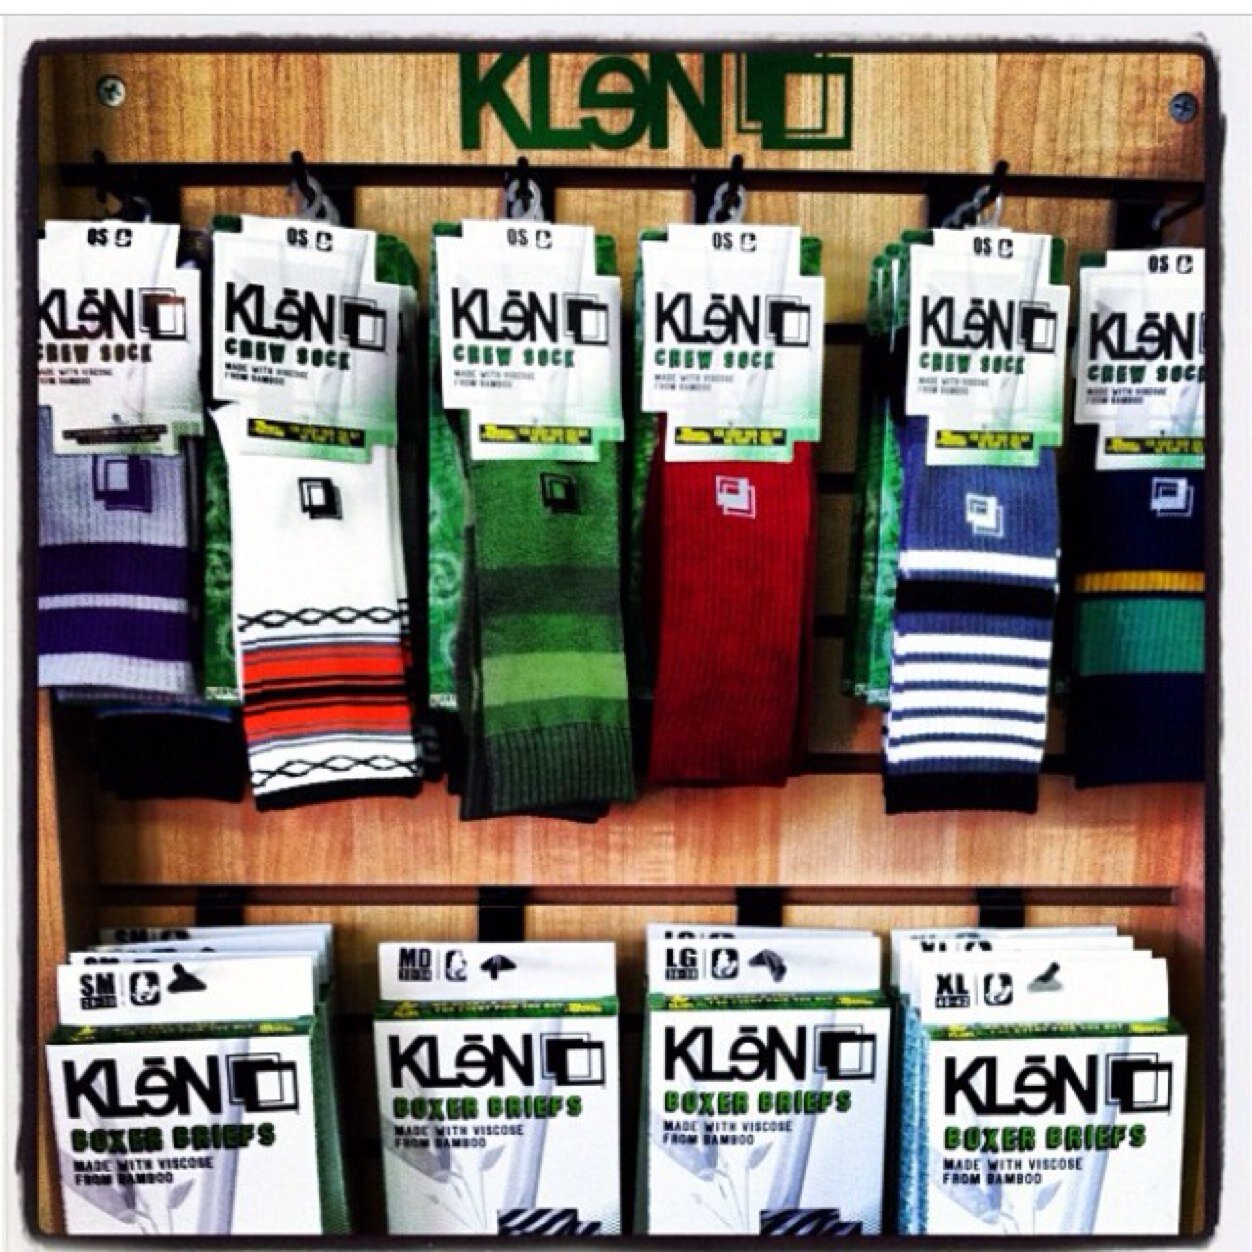 Socks, Briefs, Shirts and much more made of Bamboo. Look good, Feel good, Do good! #hashtag your Klenlaundry.